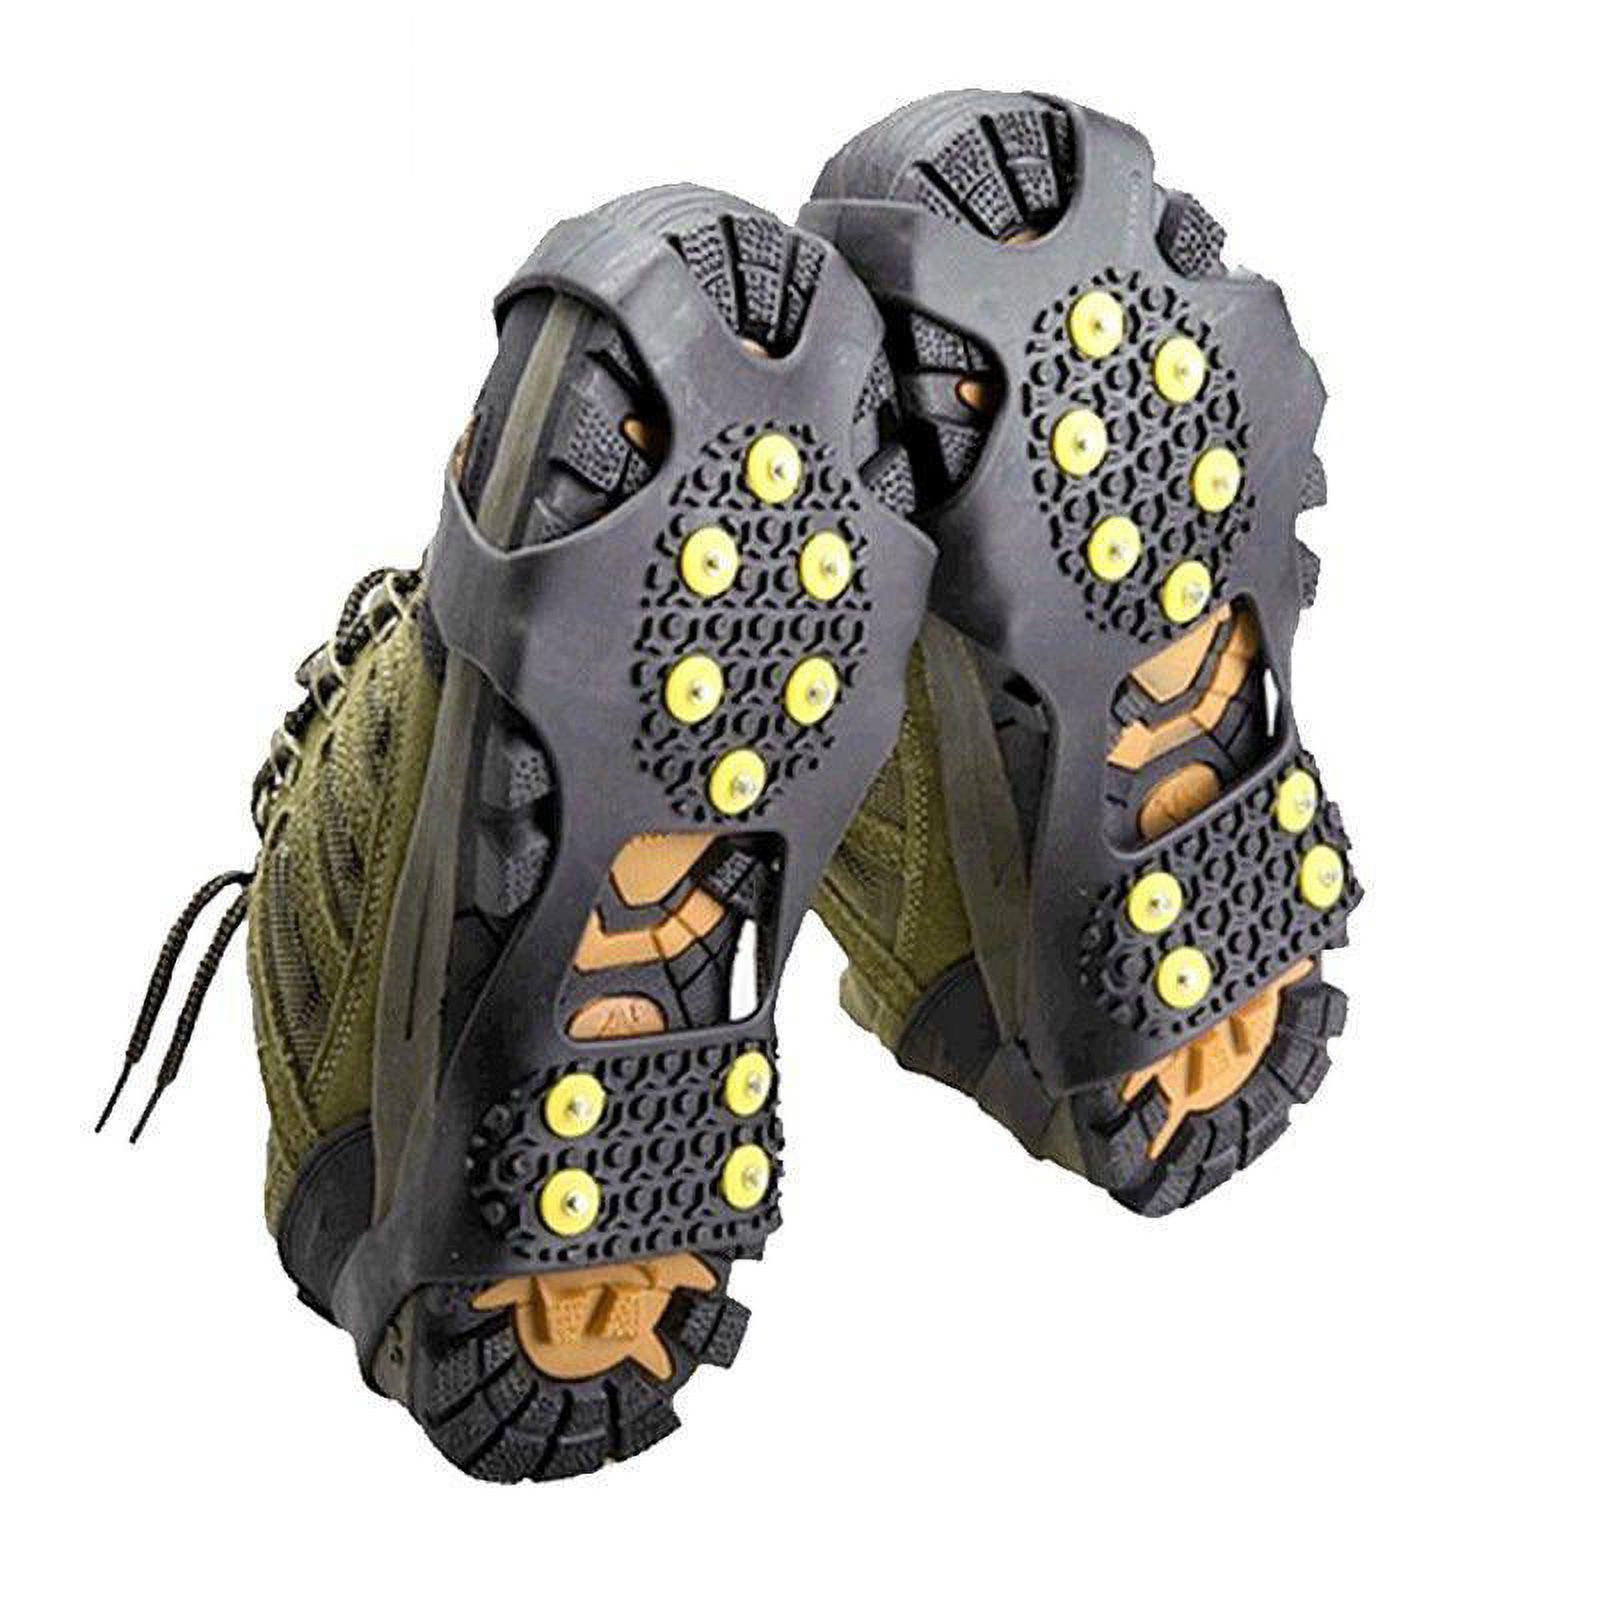 Crampons Ice Traction Cleats Large - Lightweight Traction Cleats for Walking on Snow & Ice - Anti Slip Shoe Grips Quickly & Easily Over Footwear - Portable Ice Grippers for Shoes & Boots - image 1 of 6